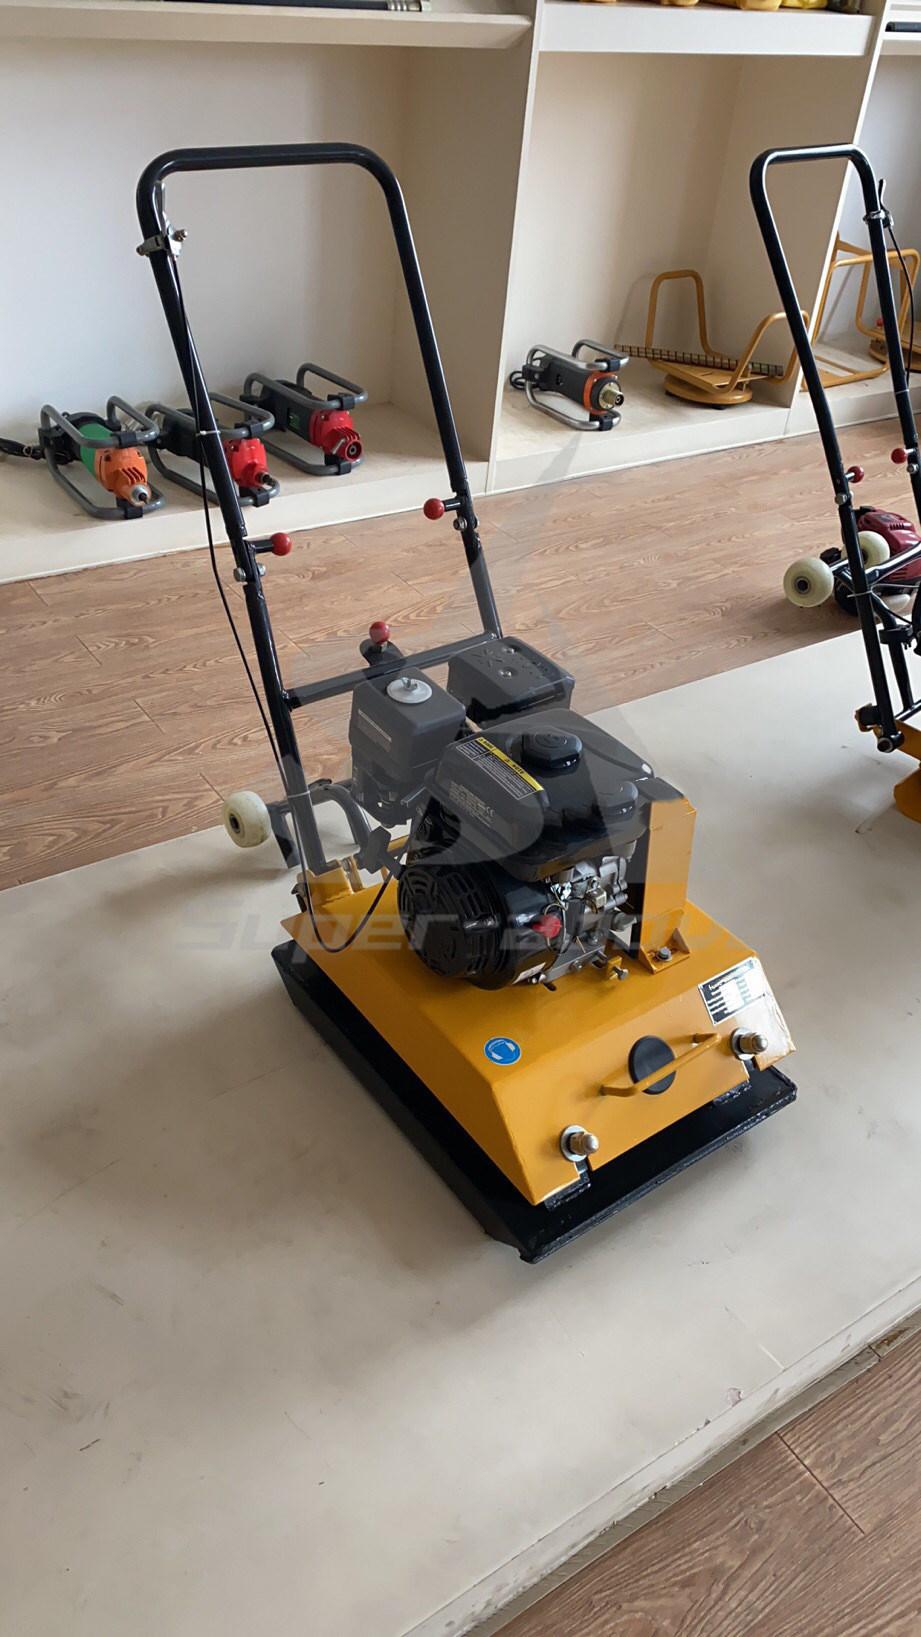 Earth-Moving Machinery SA-300 Plate Compactor with Best Price